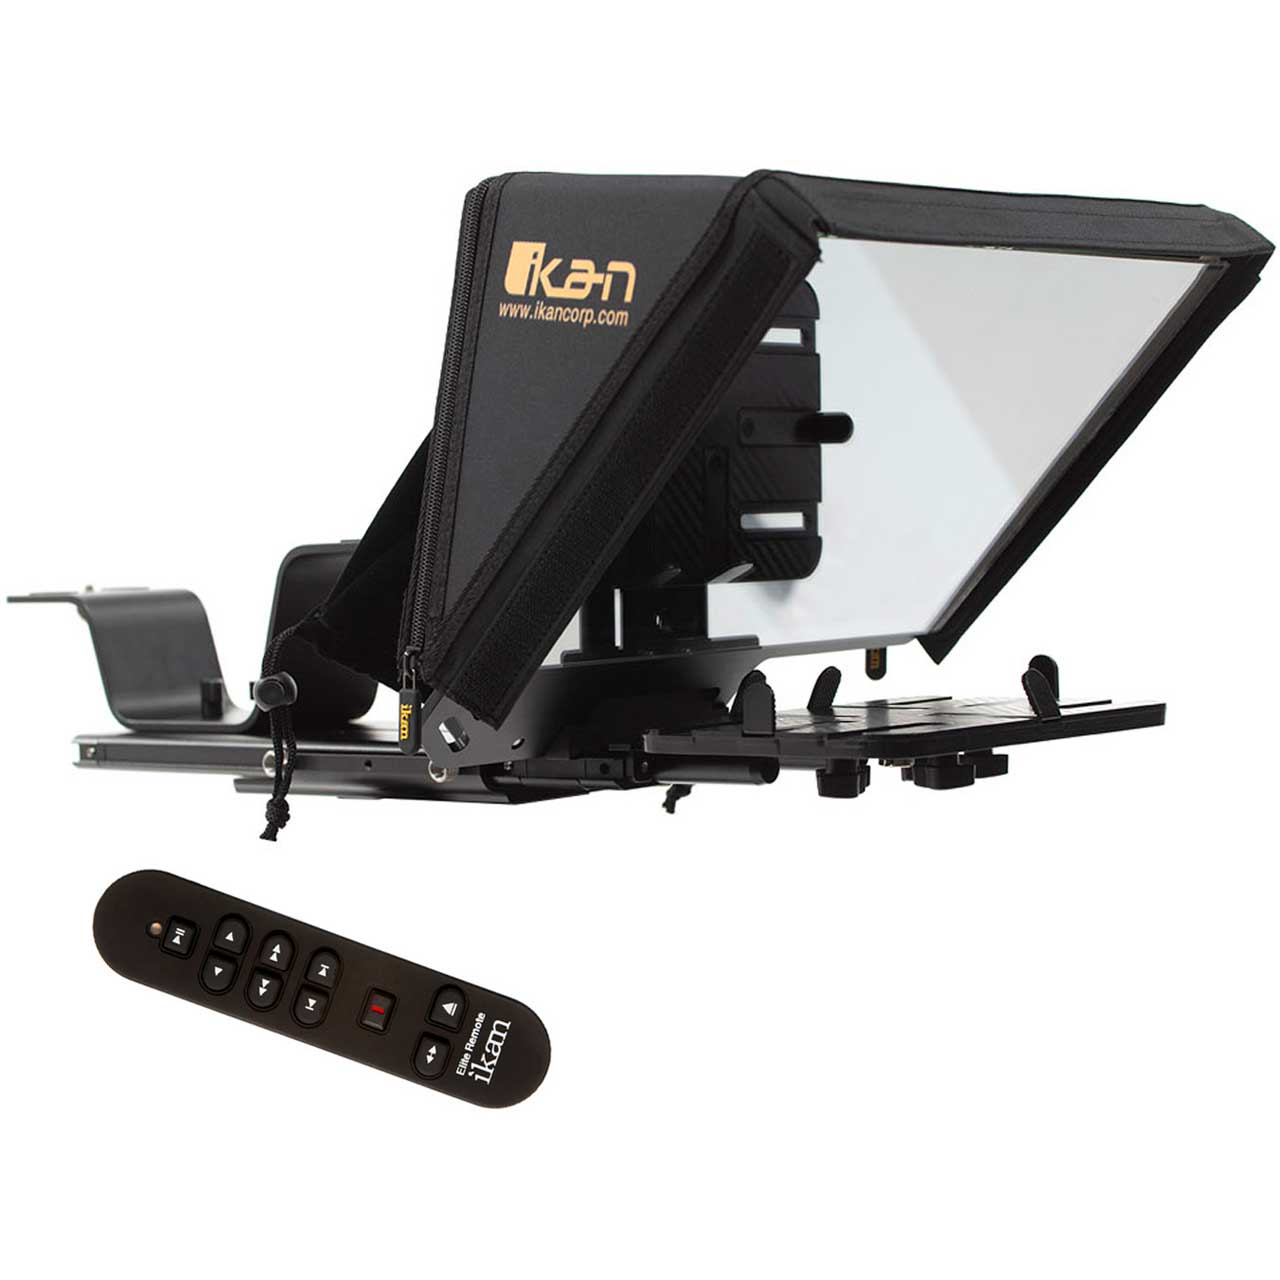 ikan PT-ELITE-PRO2-RC Elite Universal Tablet - iPad - and iPad Pro Teleprompter with Remote Control - Version 2 IKAN-PTELITPRO2R